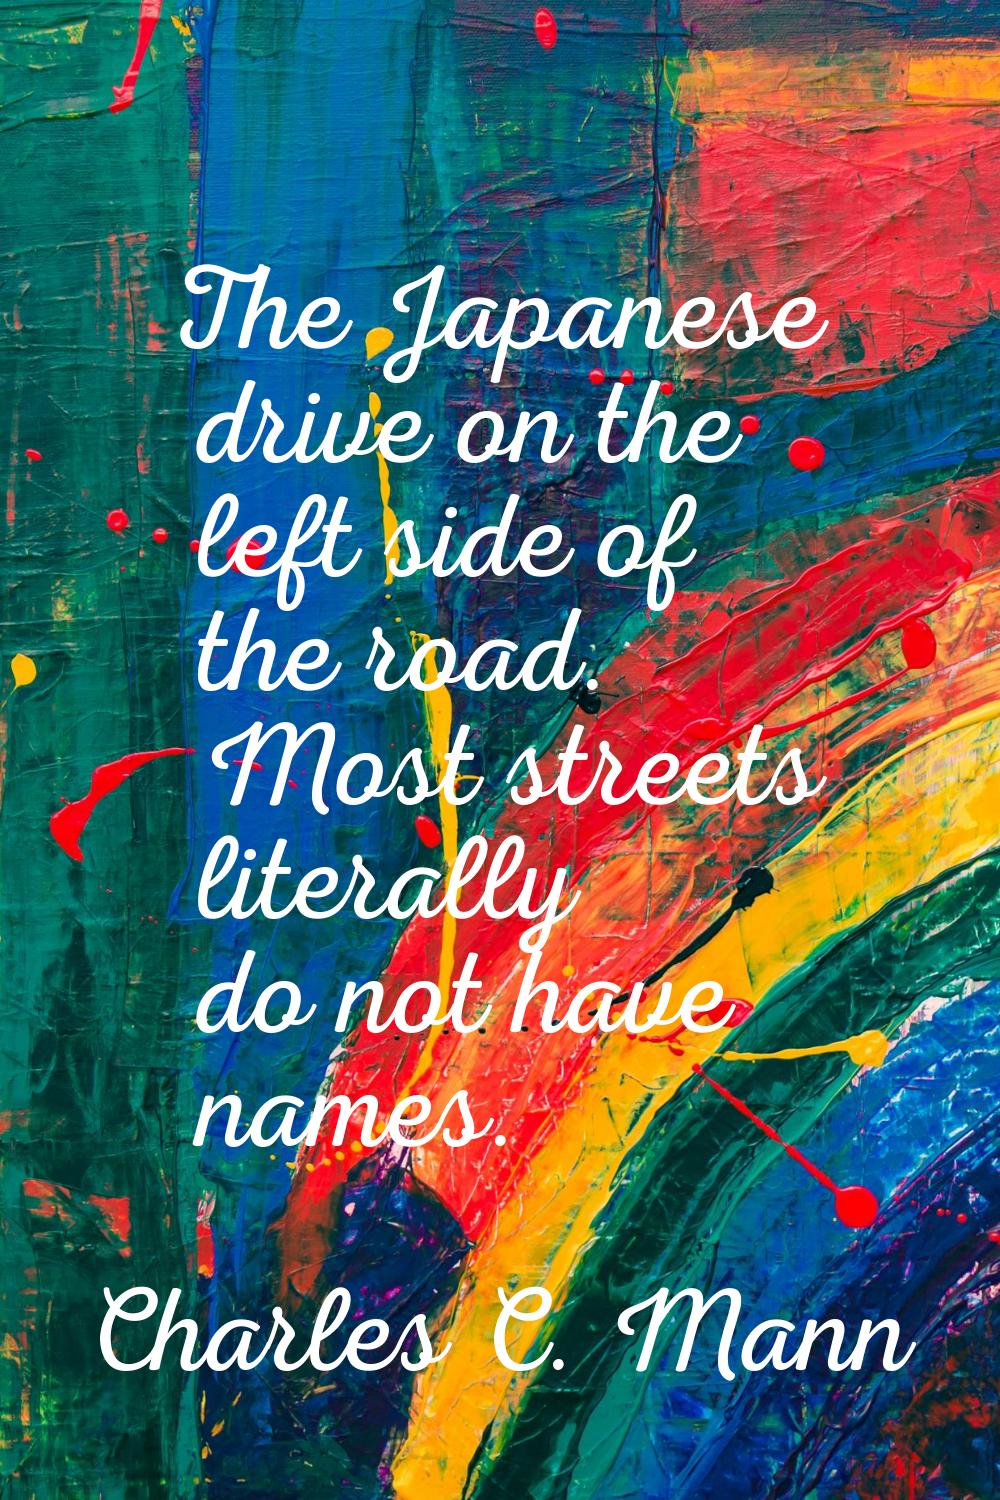 The Japanese drive on the left side of the road. Most streets literally do not have names.